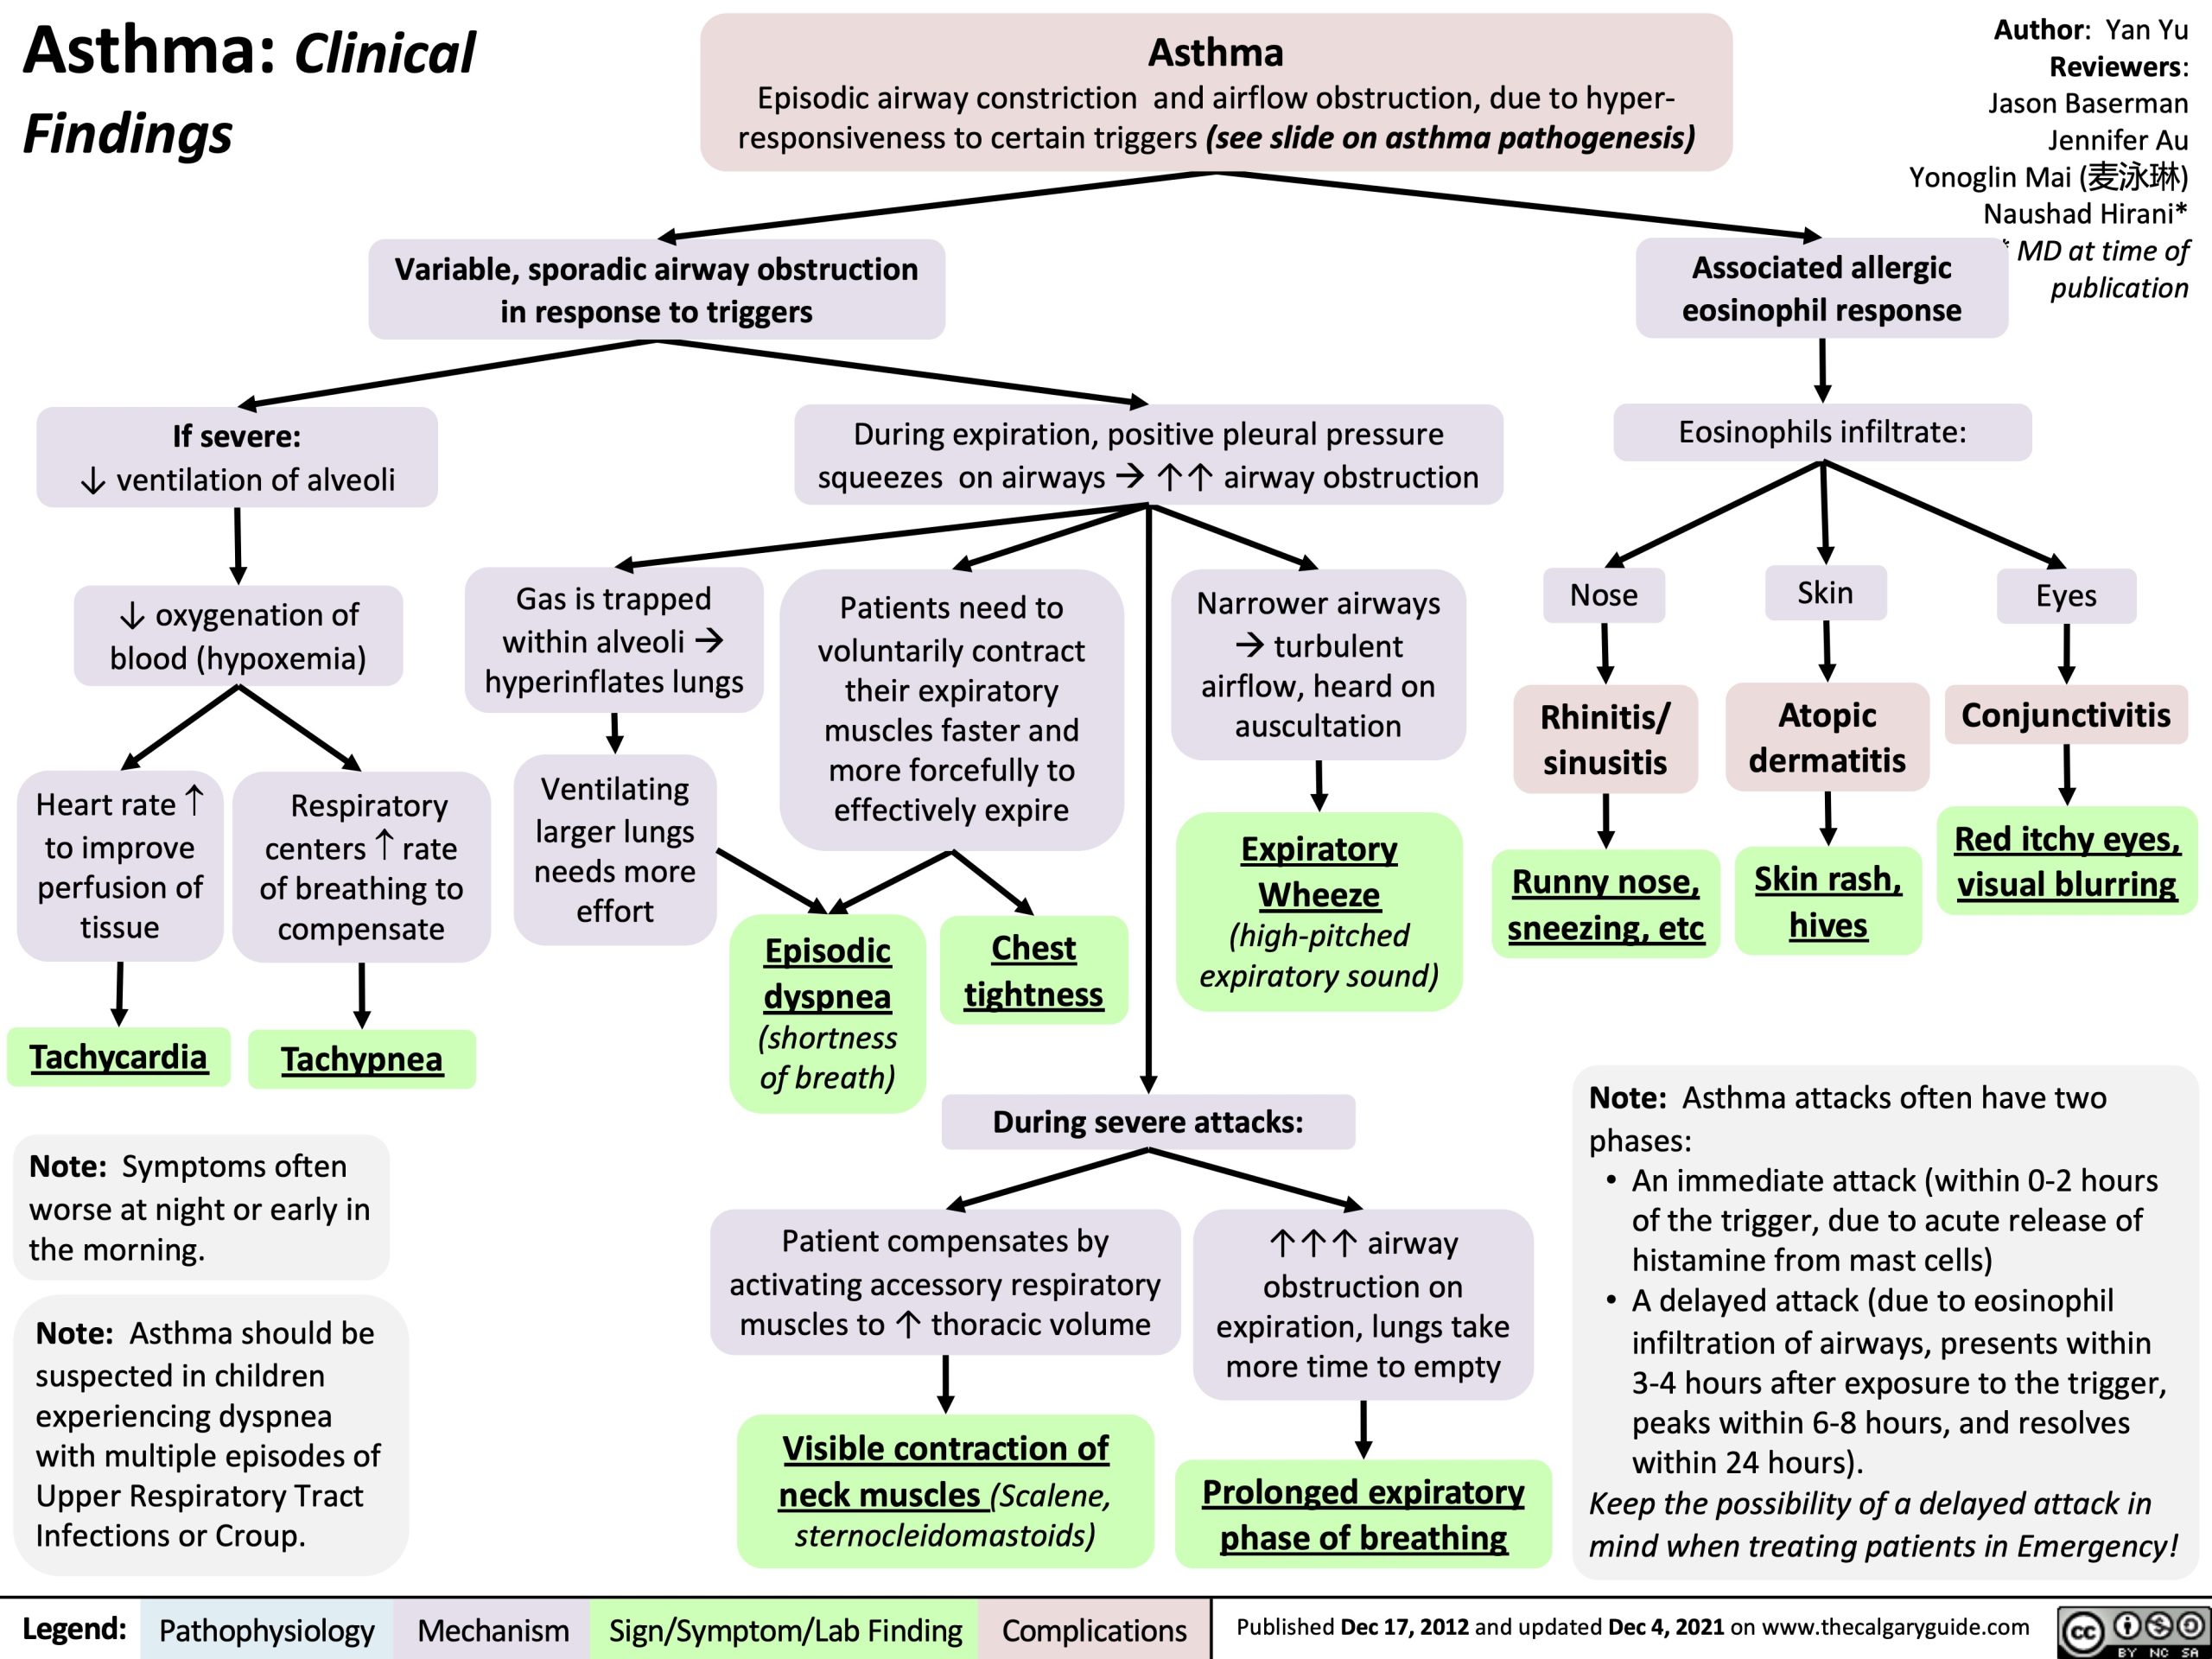 Asthma clinical findings